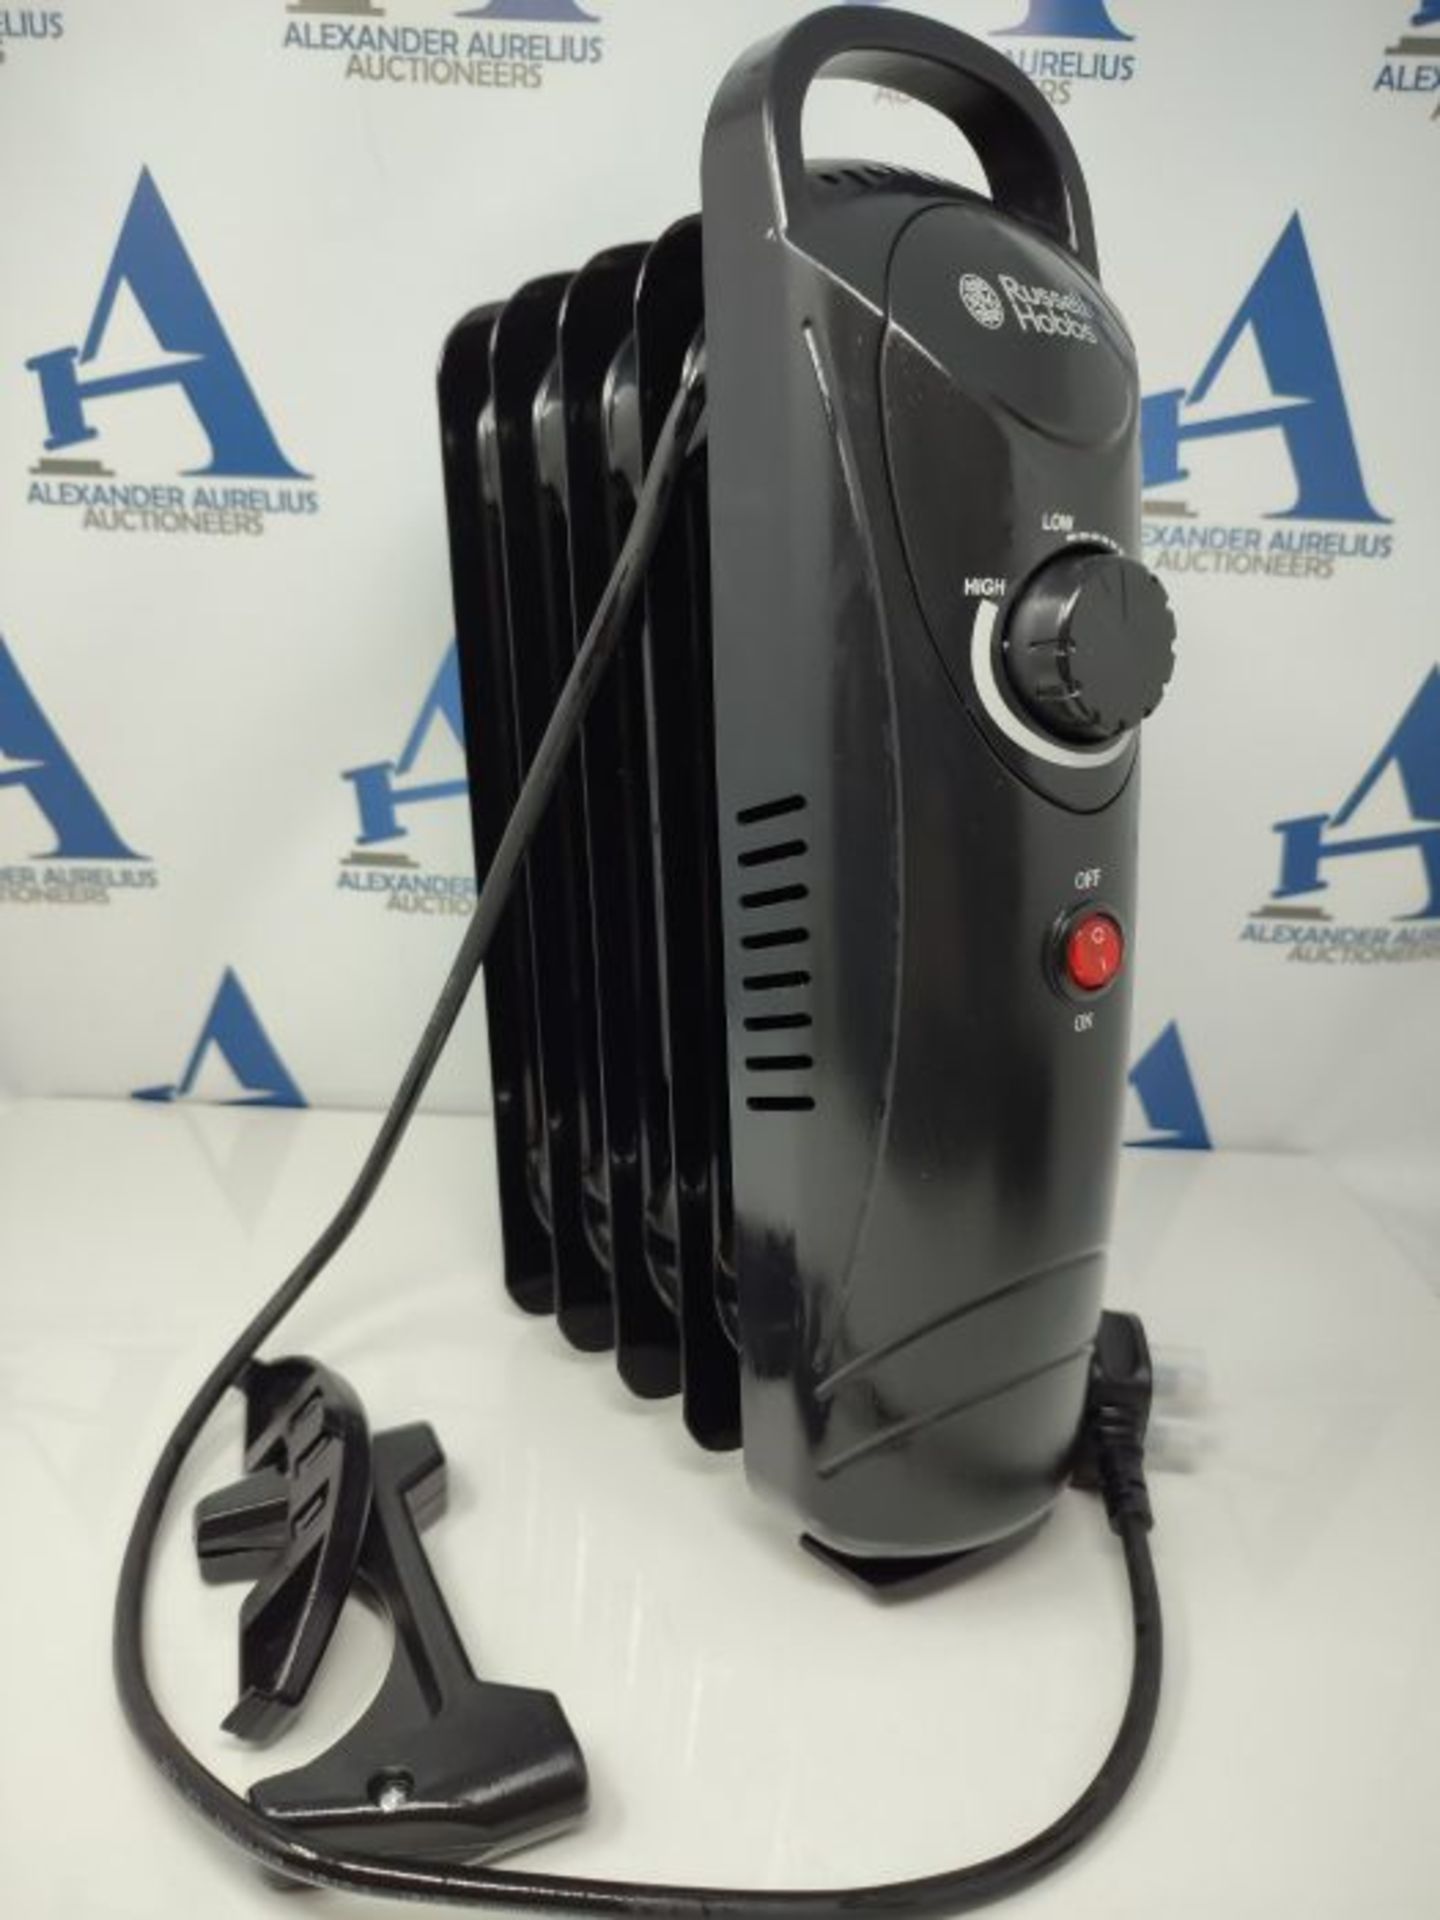 Russell Hobbs 650W Oil Filled Radiator, 5 Fin Portable Electric Heater - Black, Adjust - Image 6 of 6